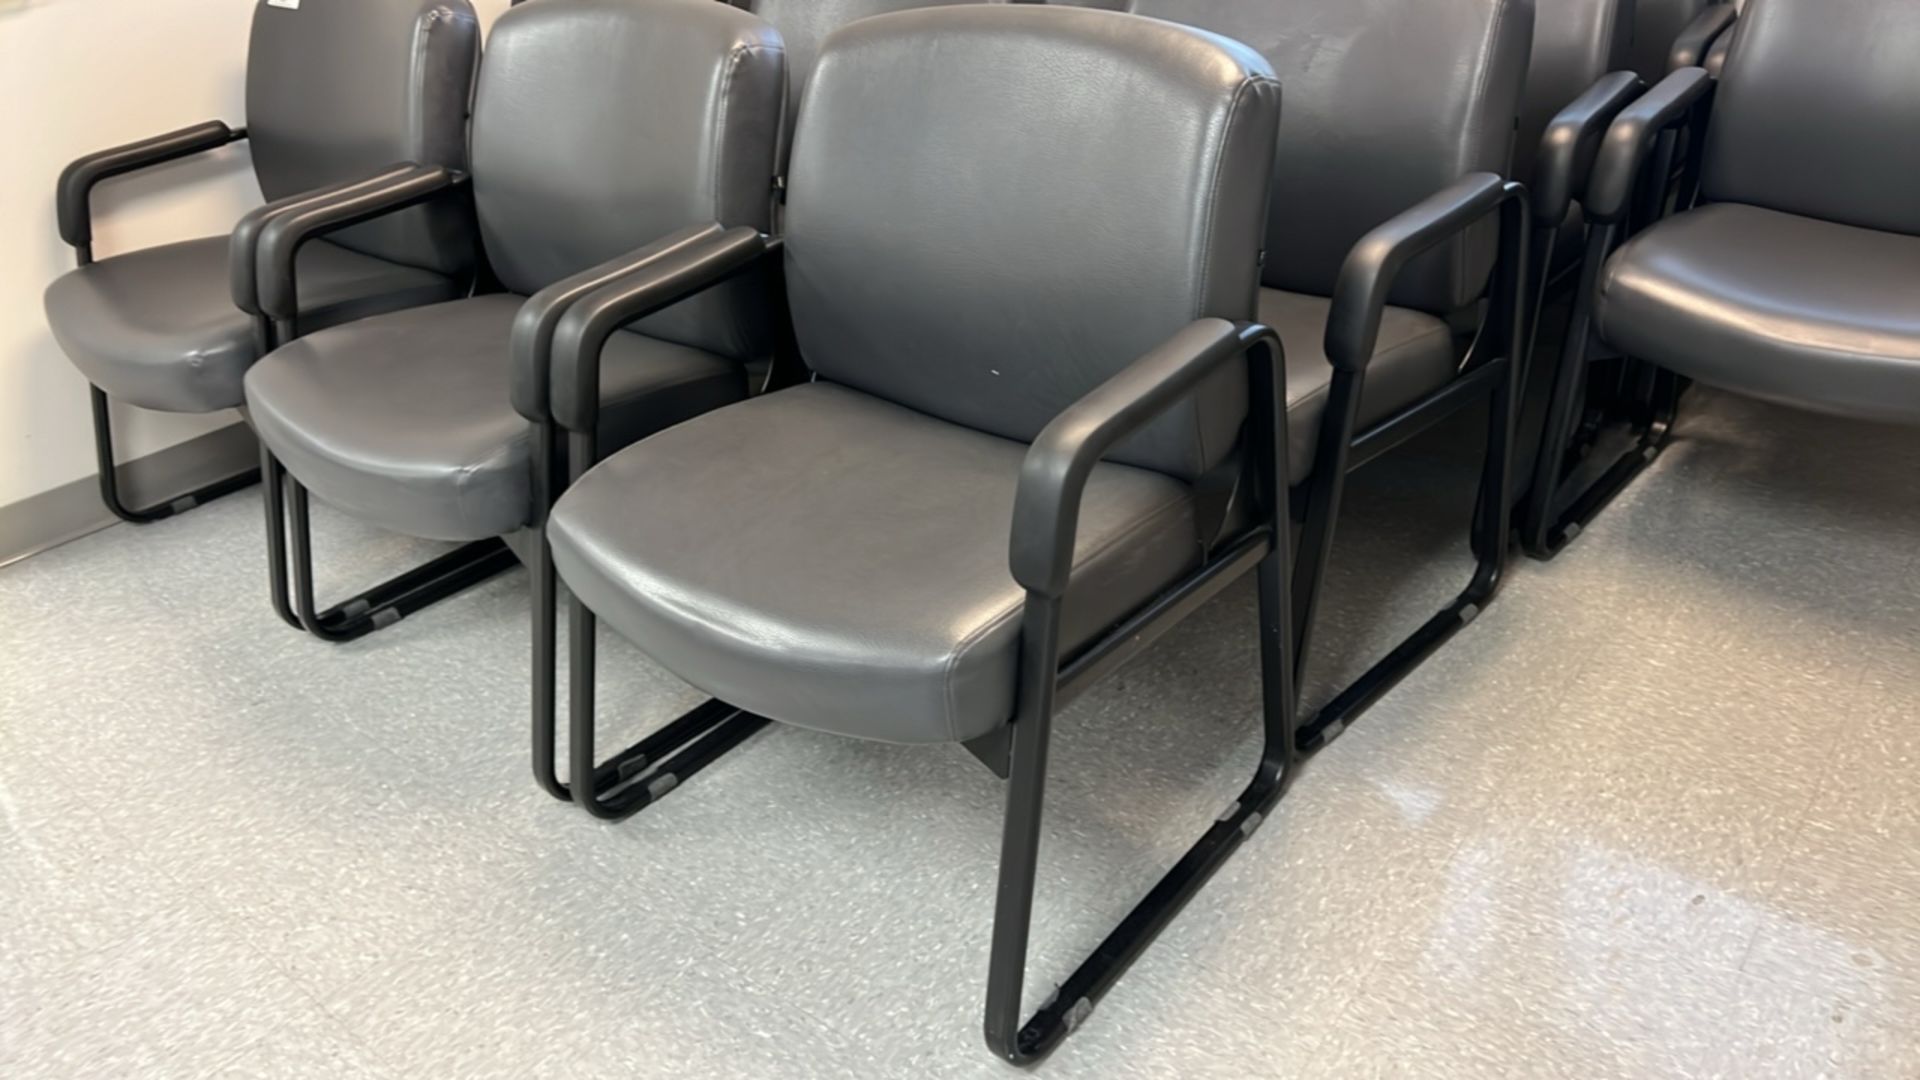 ARM CHAIRS, QTY. (14) (GREY) - Image 2 of 4